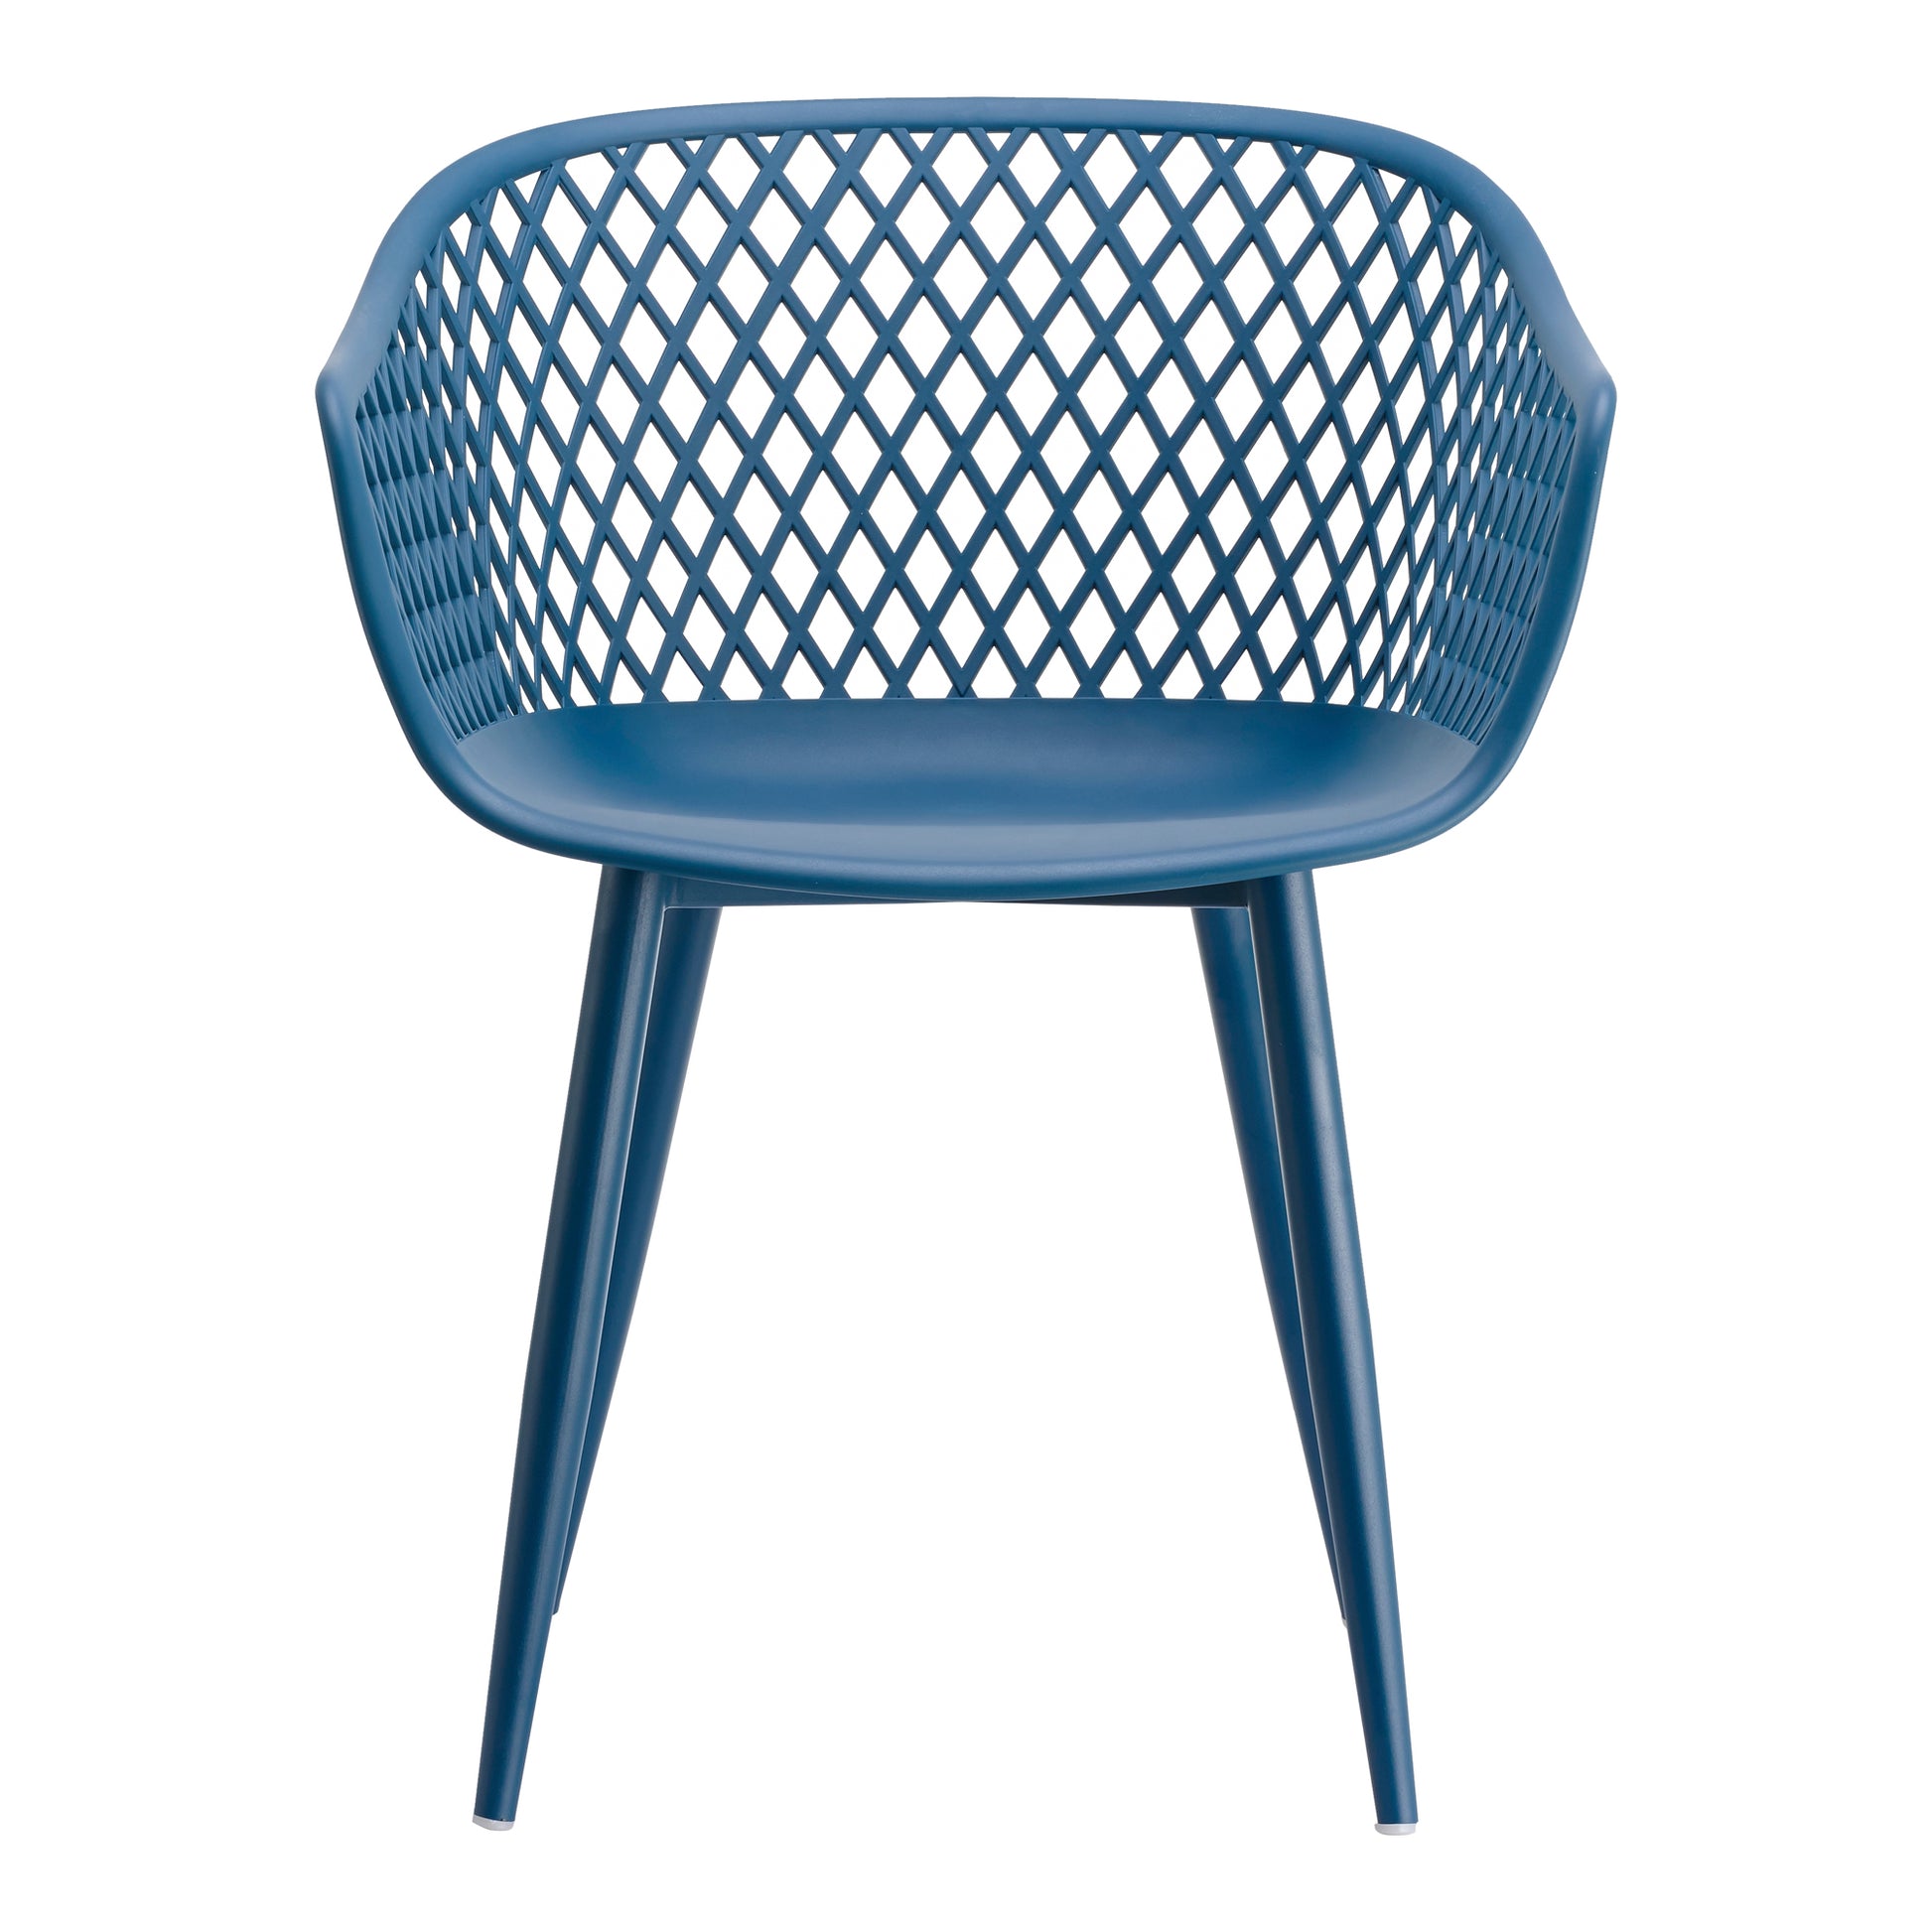 Piazza Outdoor Chair Blue-M2 QX-1001-26 Sold as 2